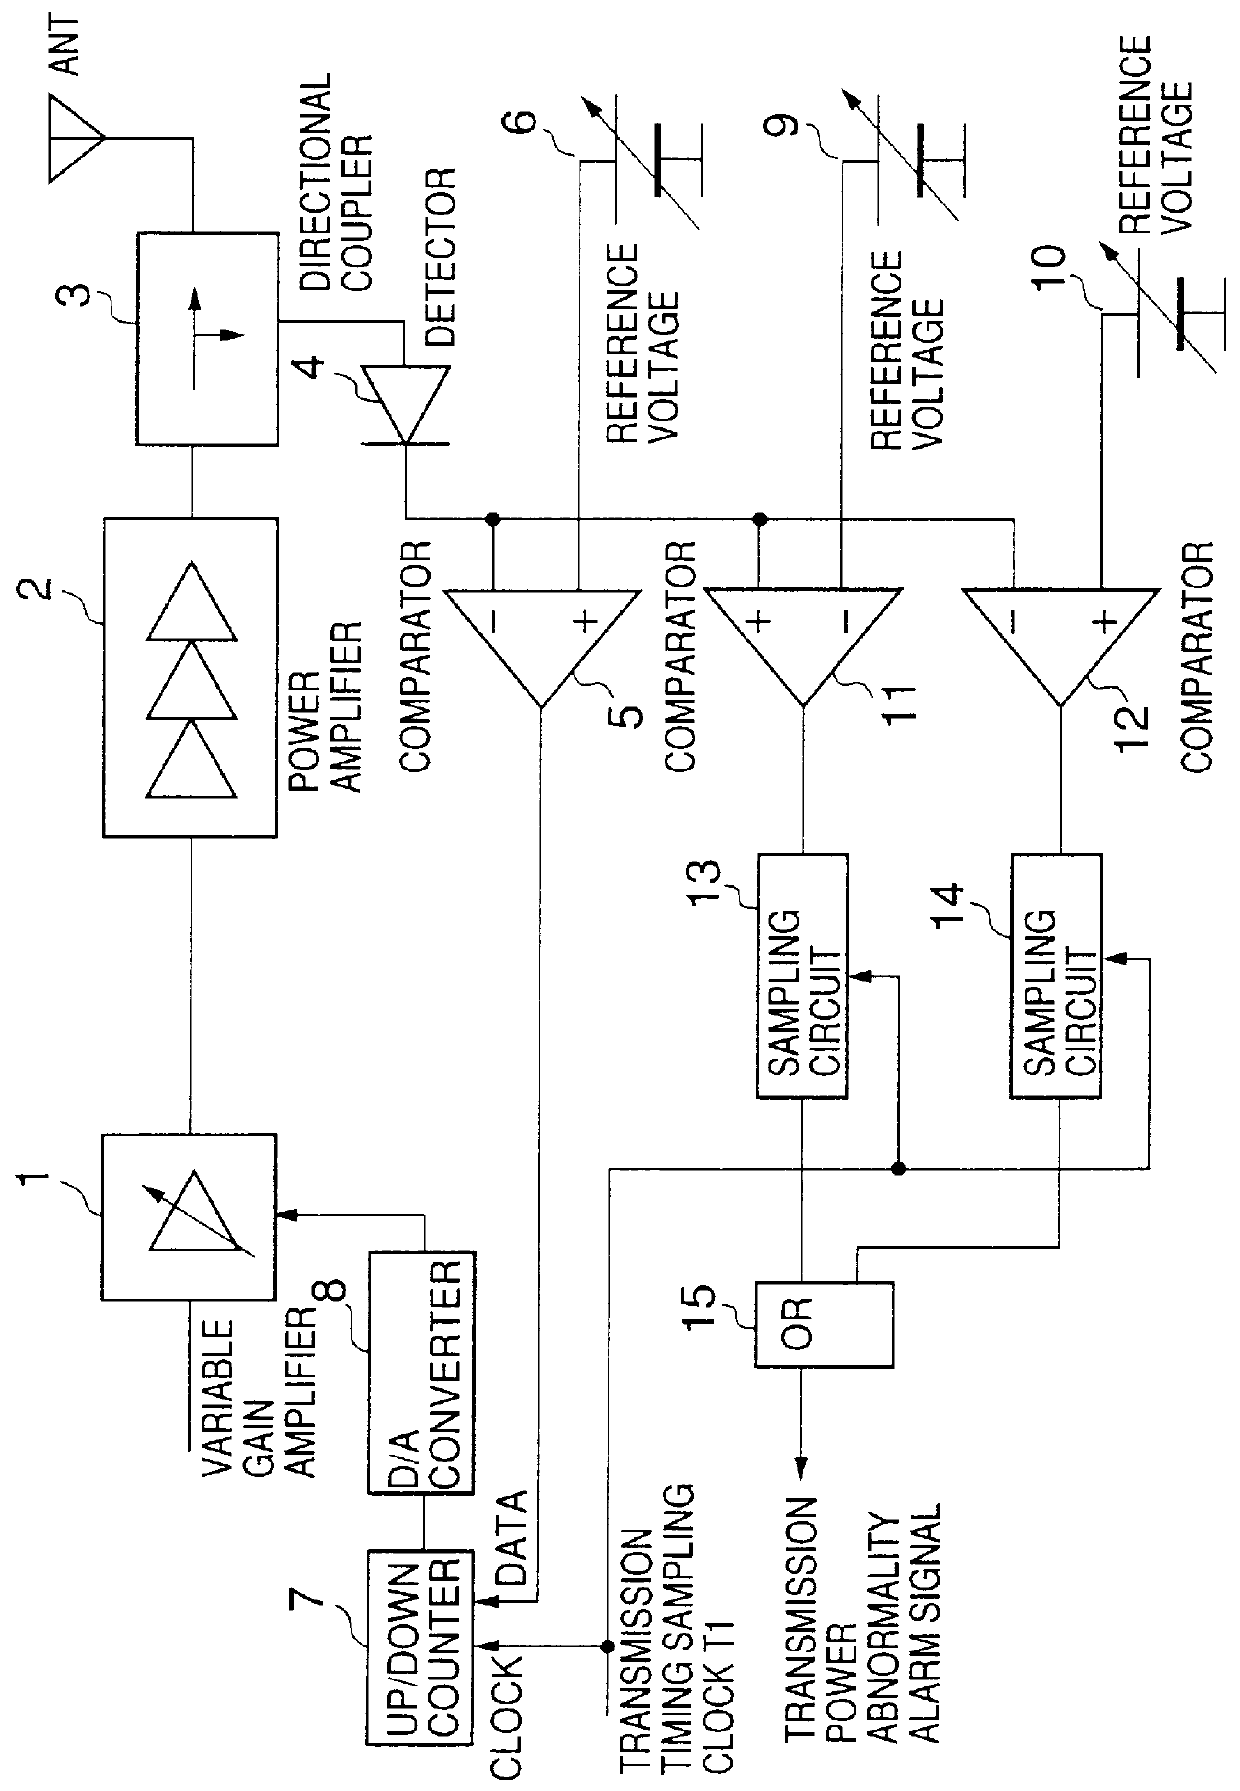 Automatic transmission power control circuit